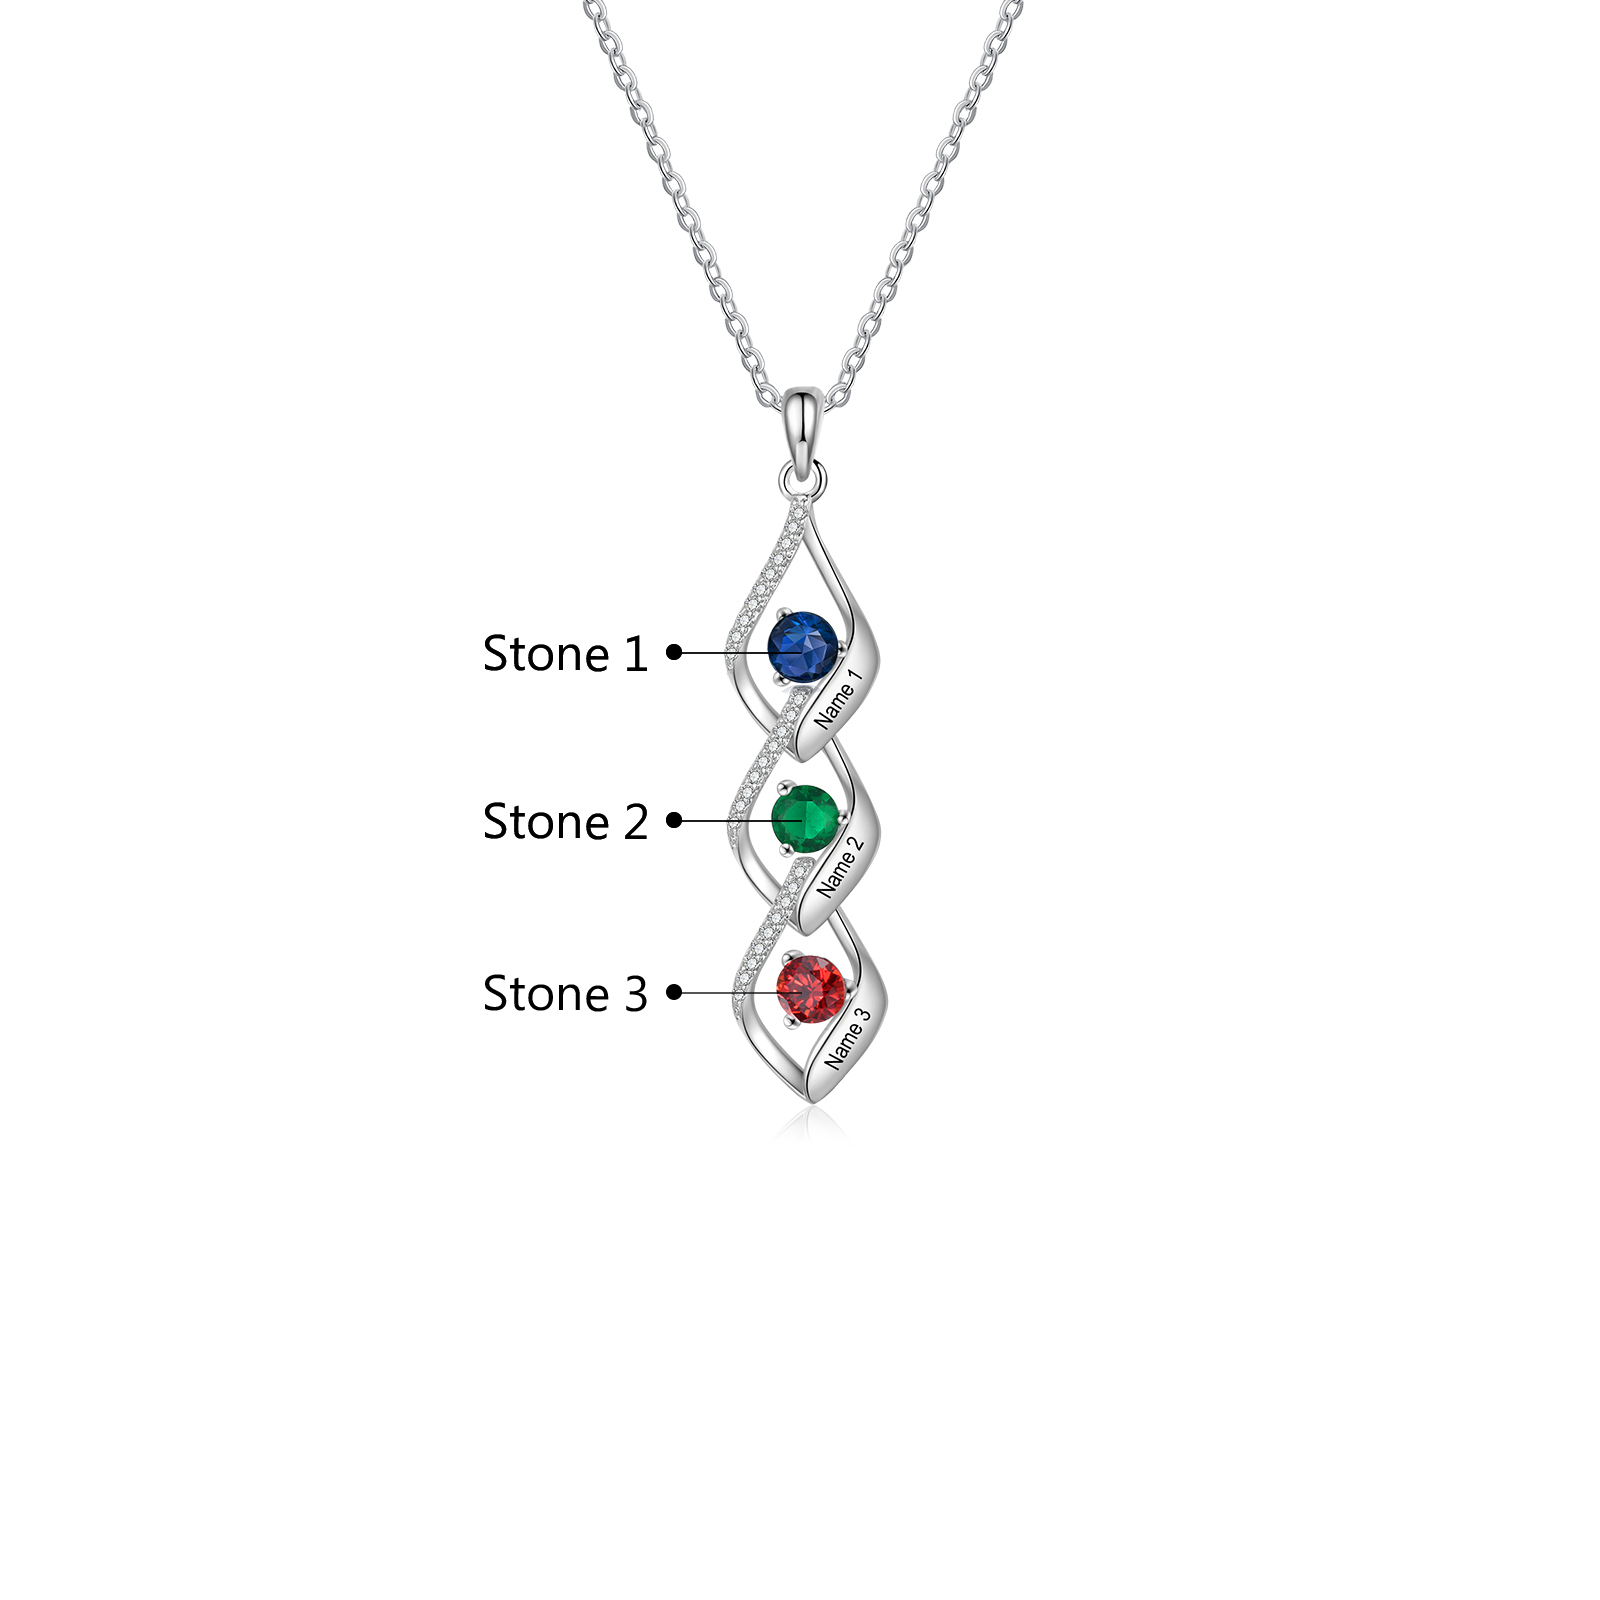 3 Names - Personalized Necklace Custom Birthstone Necklace Engraved with Name A special Gift For Mom/Grandma